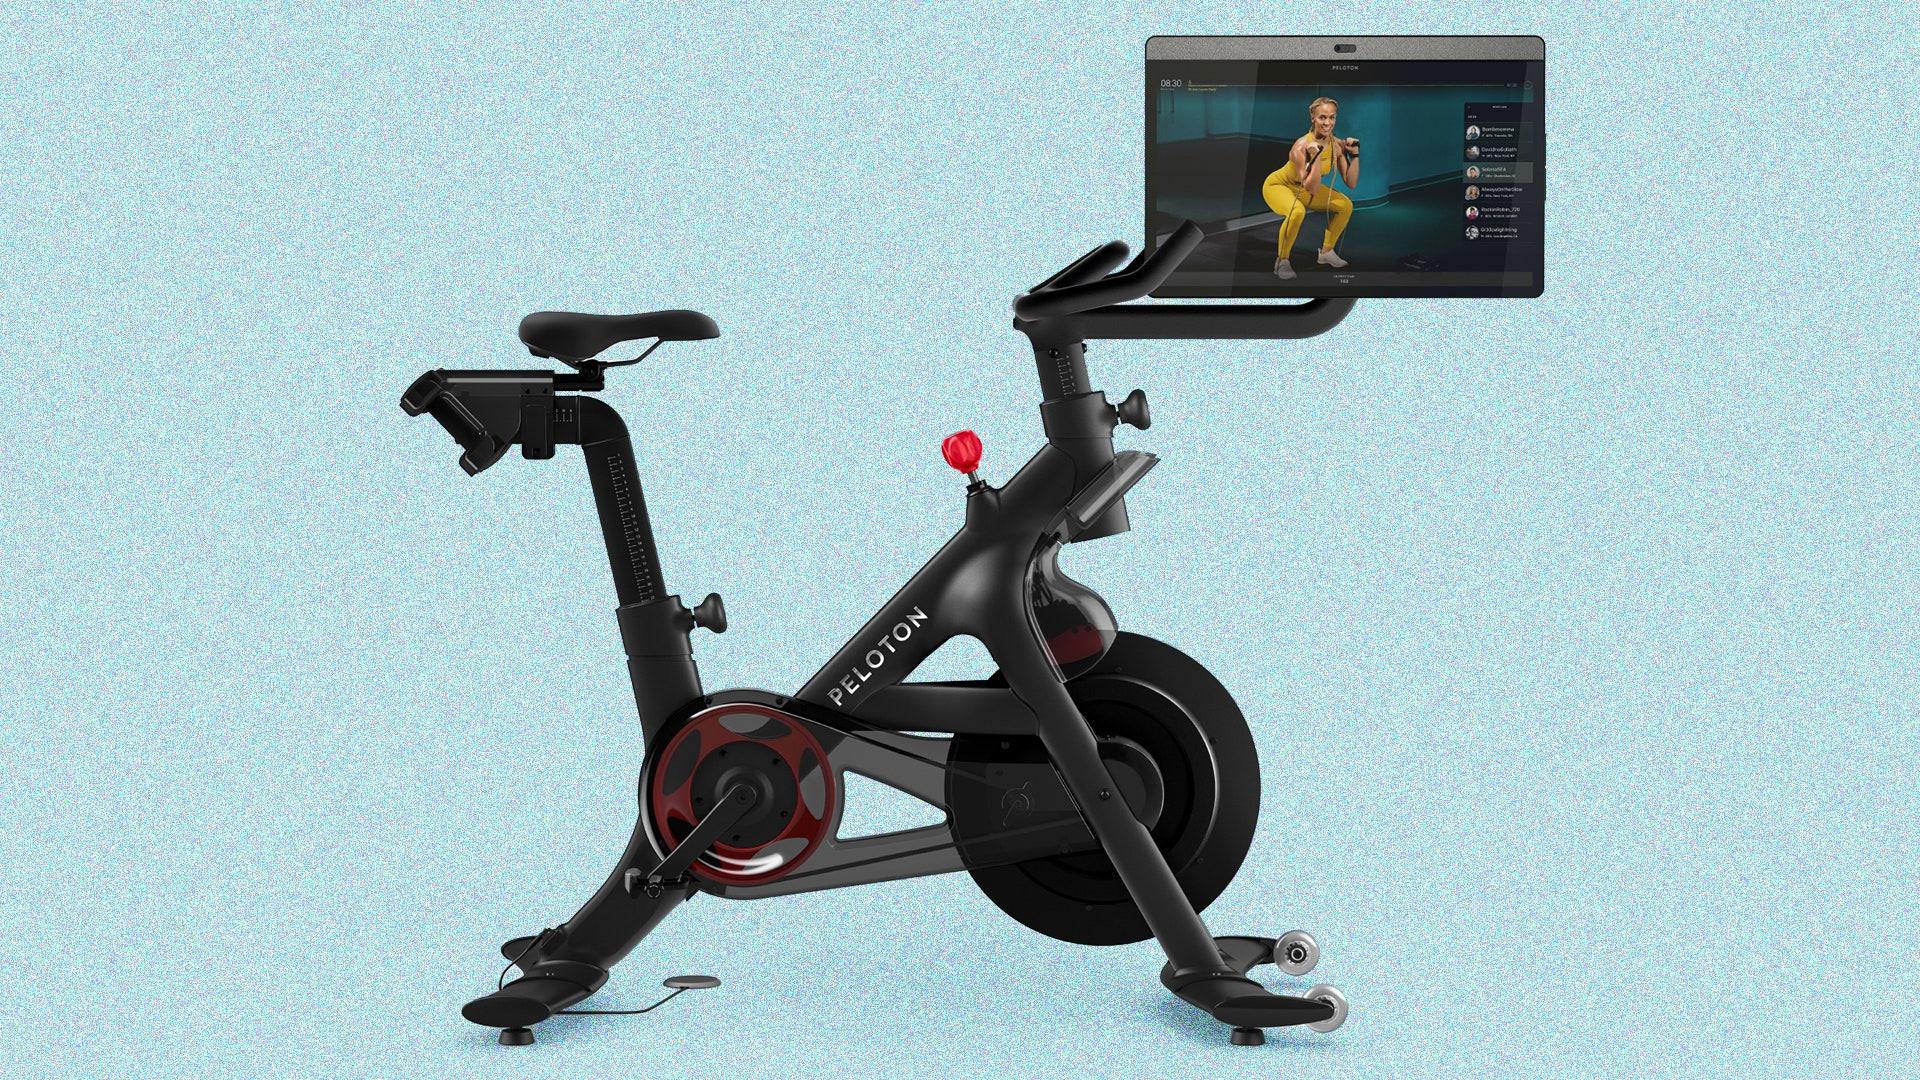 Exercise Bike Wallpapers - Top Free Exercise Bike Backgrounds ...